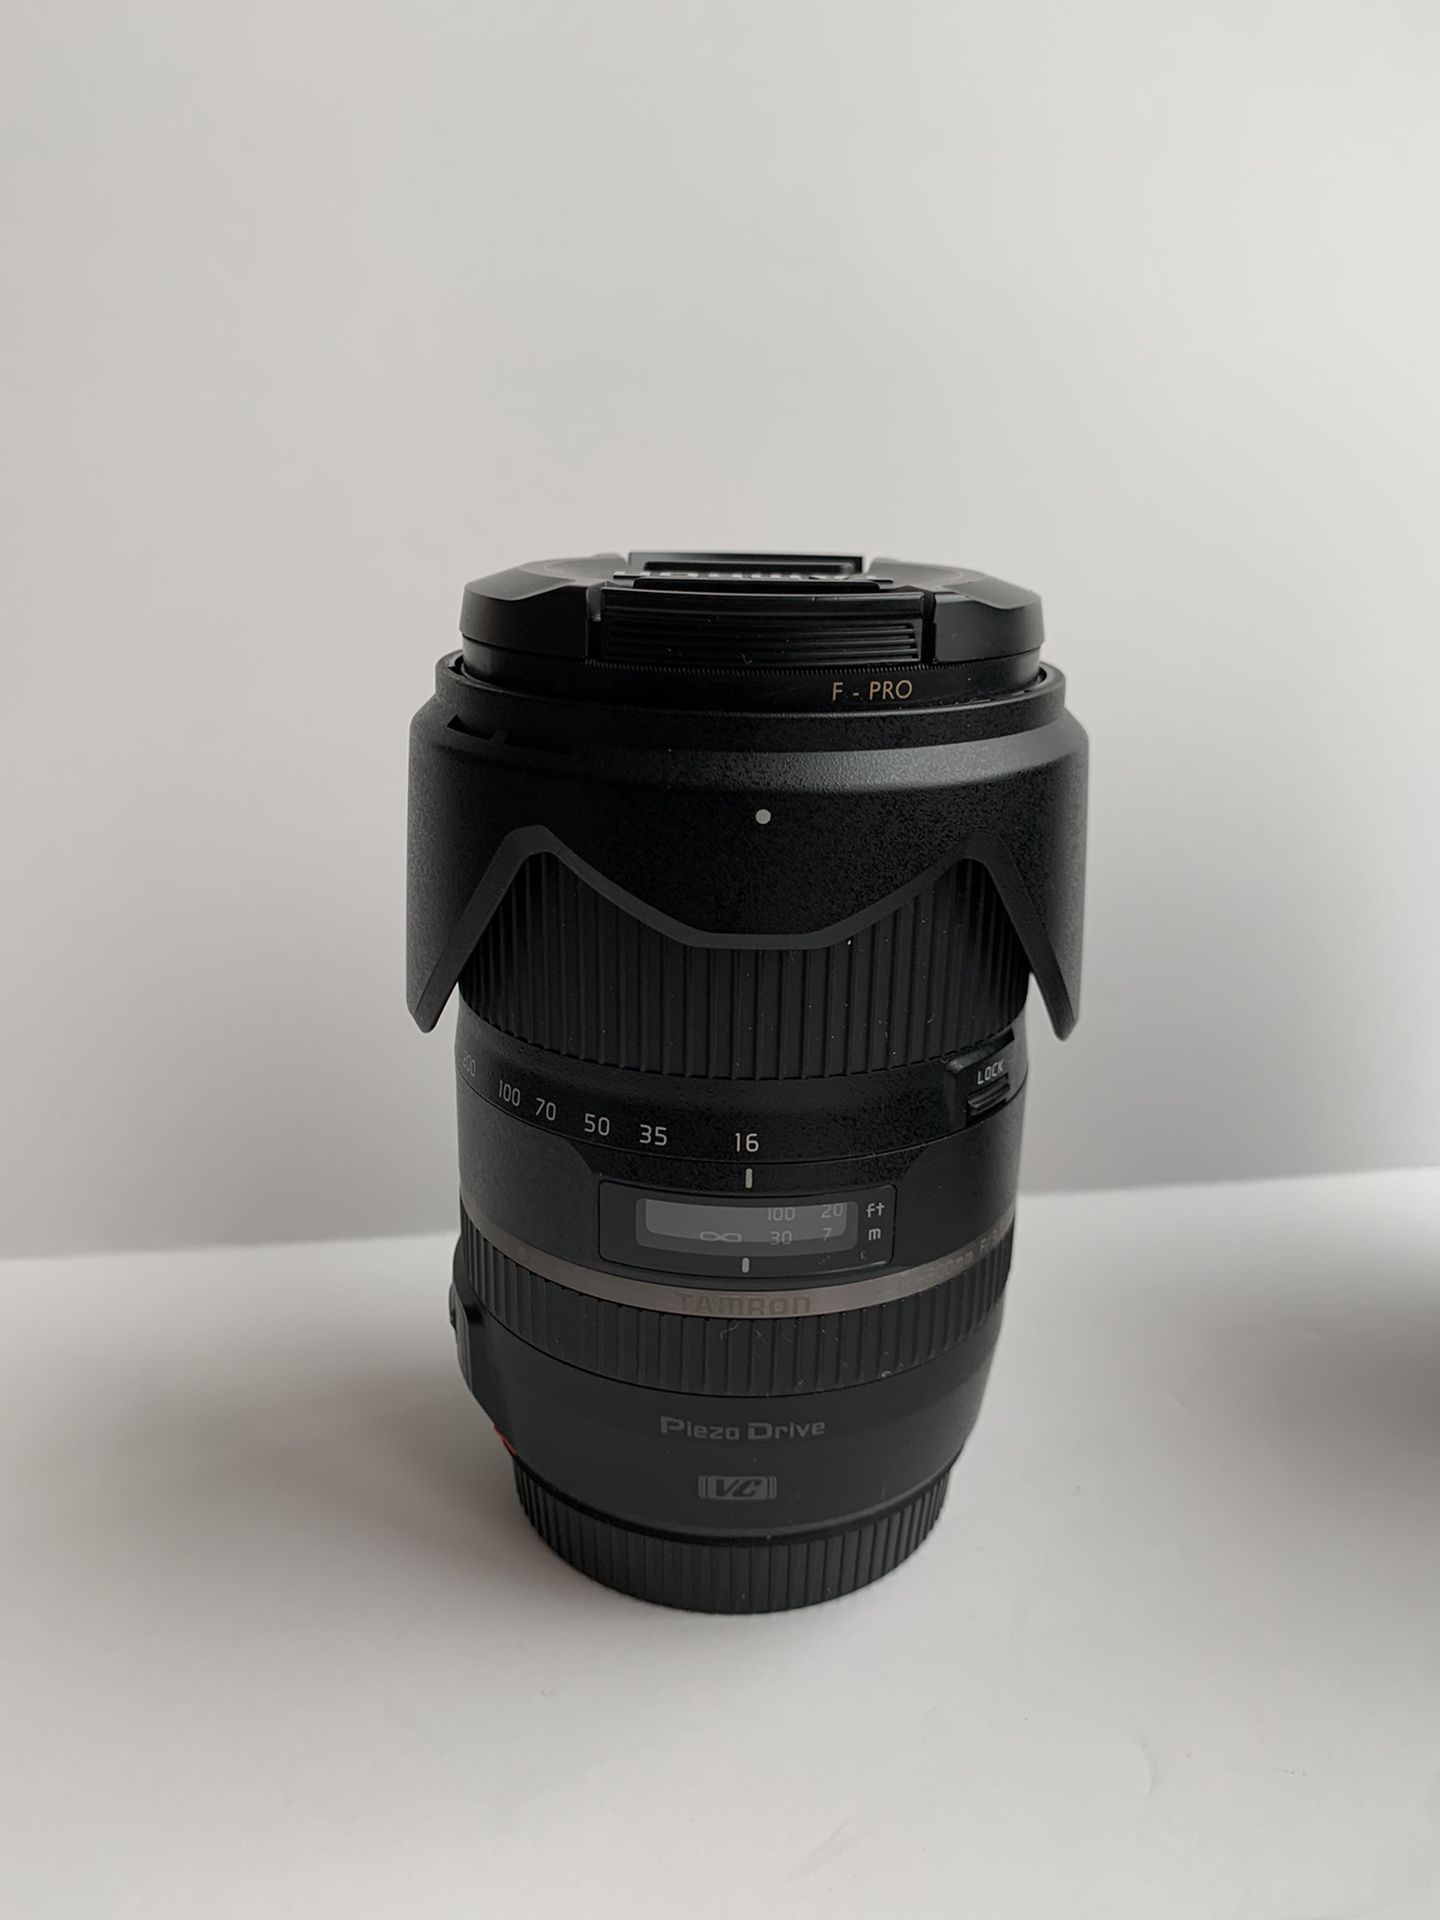 Tamron 16-300mm f/3.5-6.3 Zoom Lens: Canon Mount - Excellent Condition